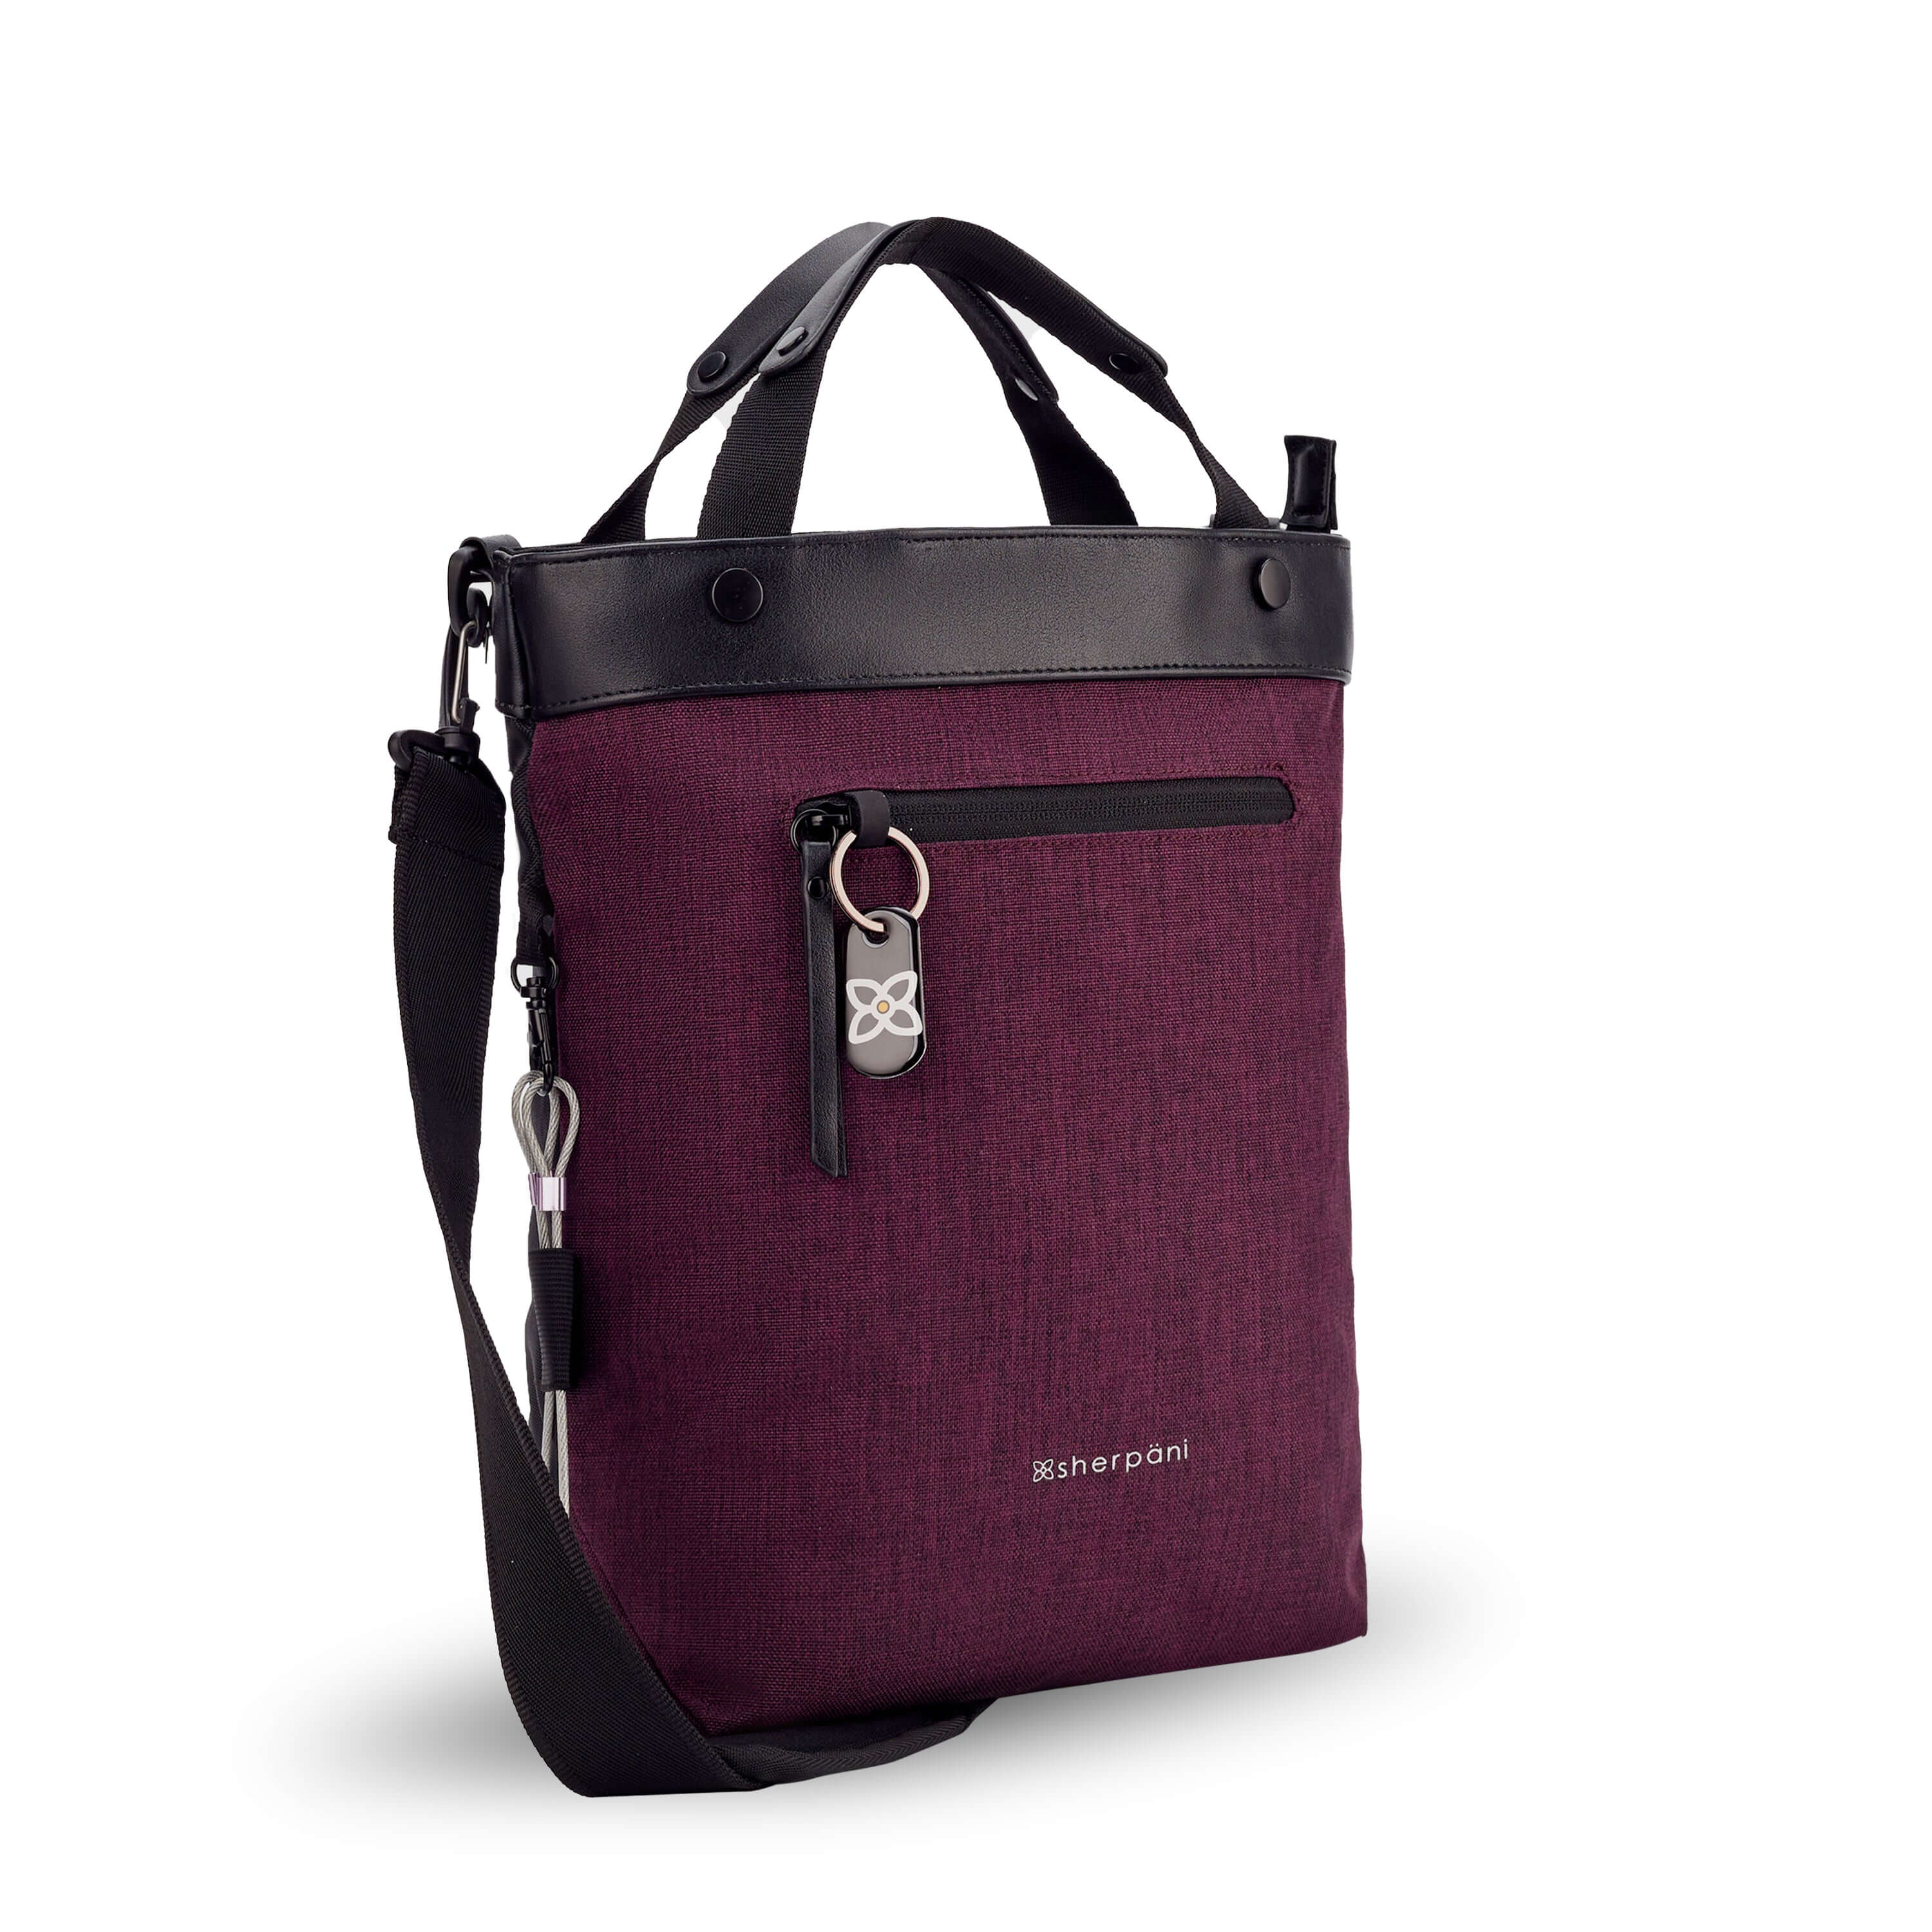 Angled front view of Sherpani's Anti-Theft bag, the Geo AT in Merlot, with vegan leather accents in black. The bag features short tote handles and an adjustable/detachable crossbody strap. There is a locking zipper compartment on the front with a ReturnMe tag. A chair loop lock is clipped to the side and secured in place by an elastic tab. 